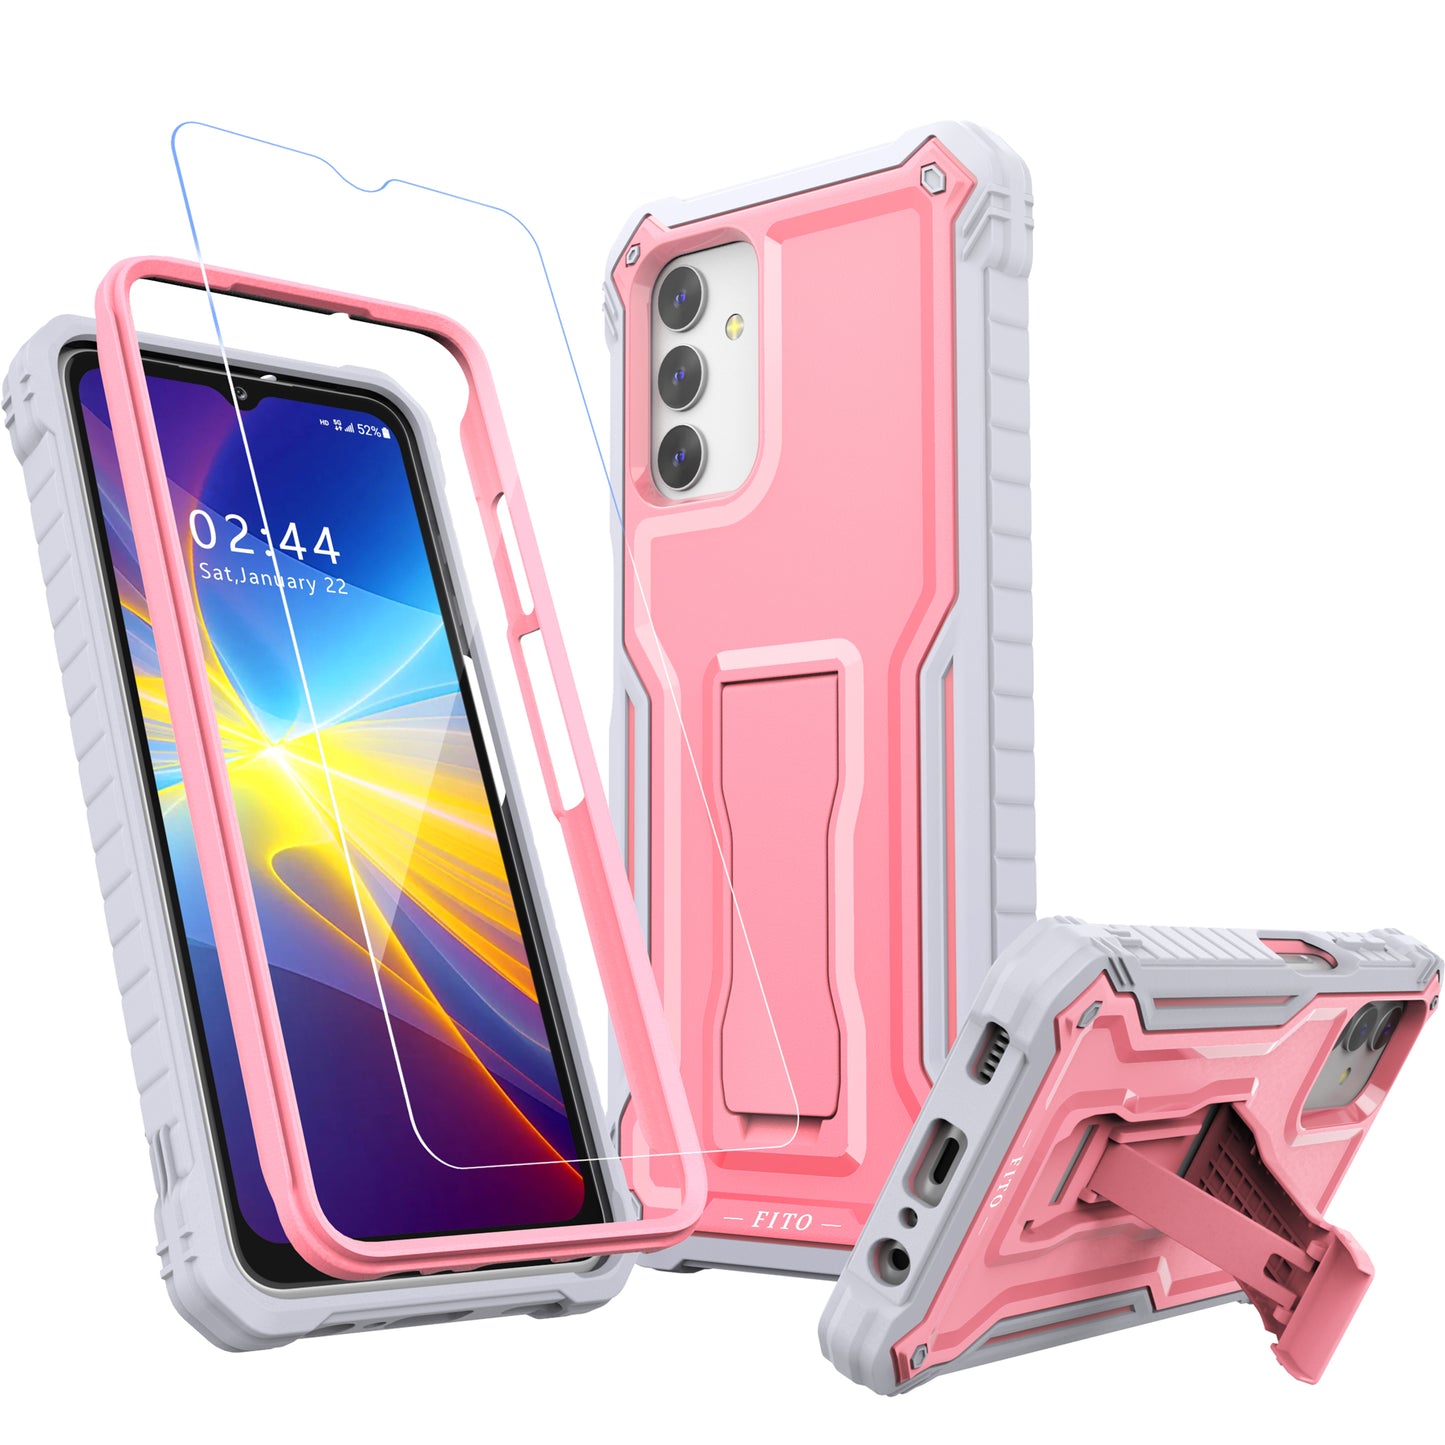 FITO for Samsung Galaxy A13 Case, Dual Layer Shockproof Heavy Duty Case with Glass Screen Protector for Samsung A13 5G Phone, Built in Kickstand